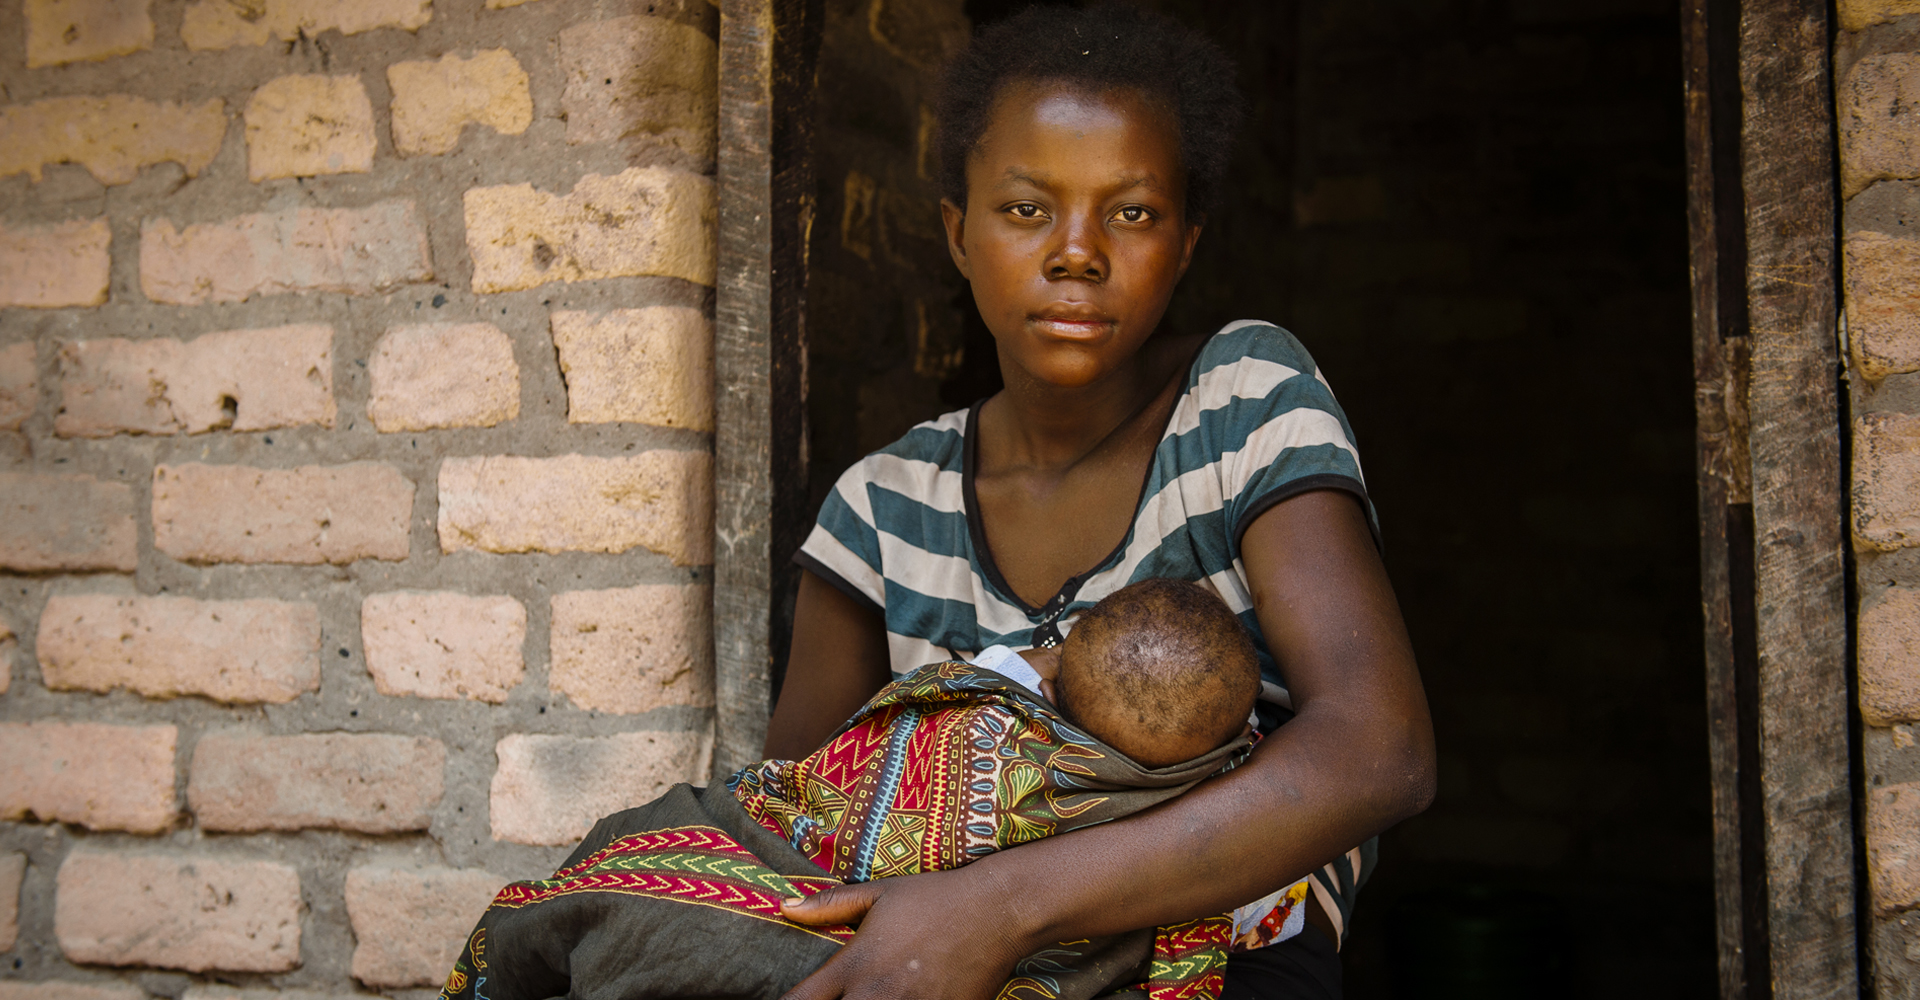 Mary (not her real name), 15, was a child bride. Now she is a widow and single mother. (Photo: Eliza Powell/Camfed)